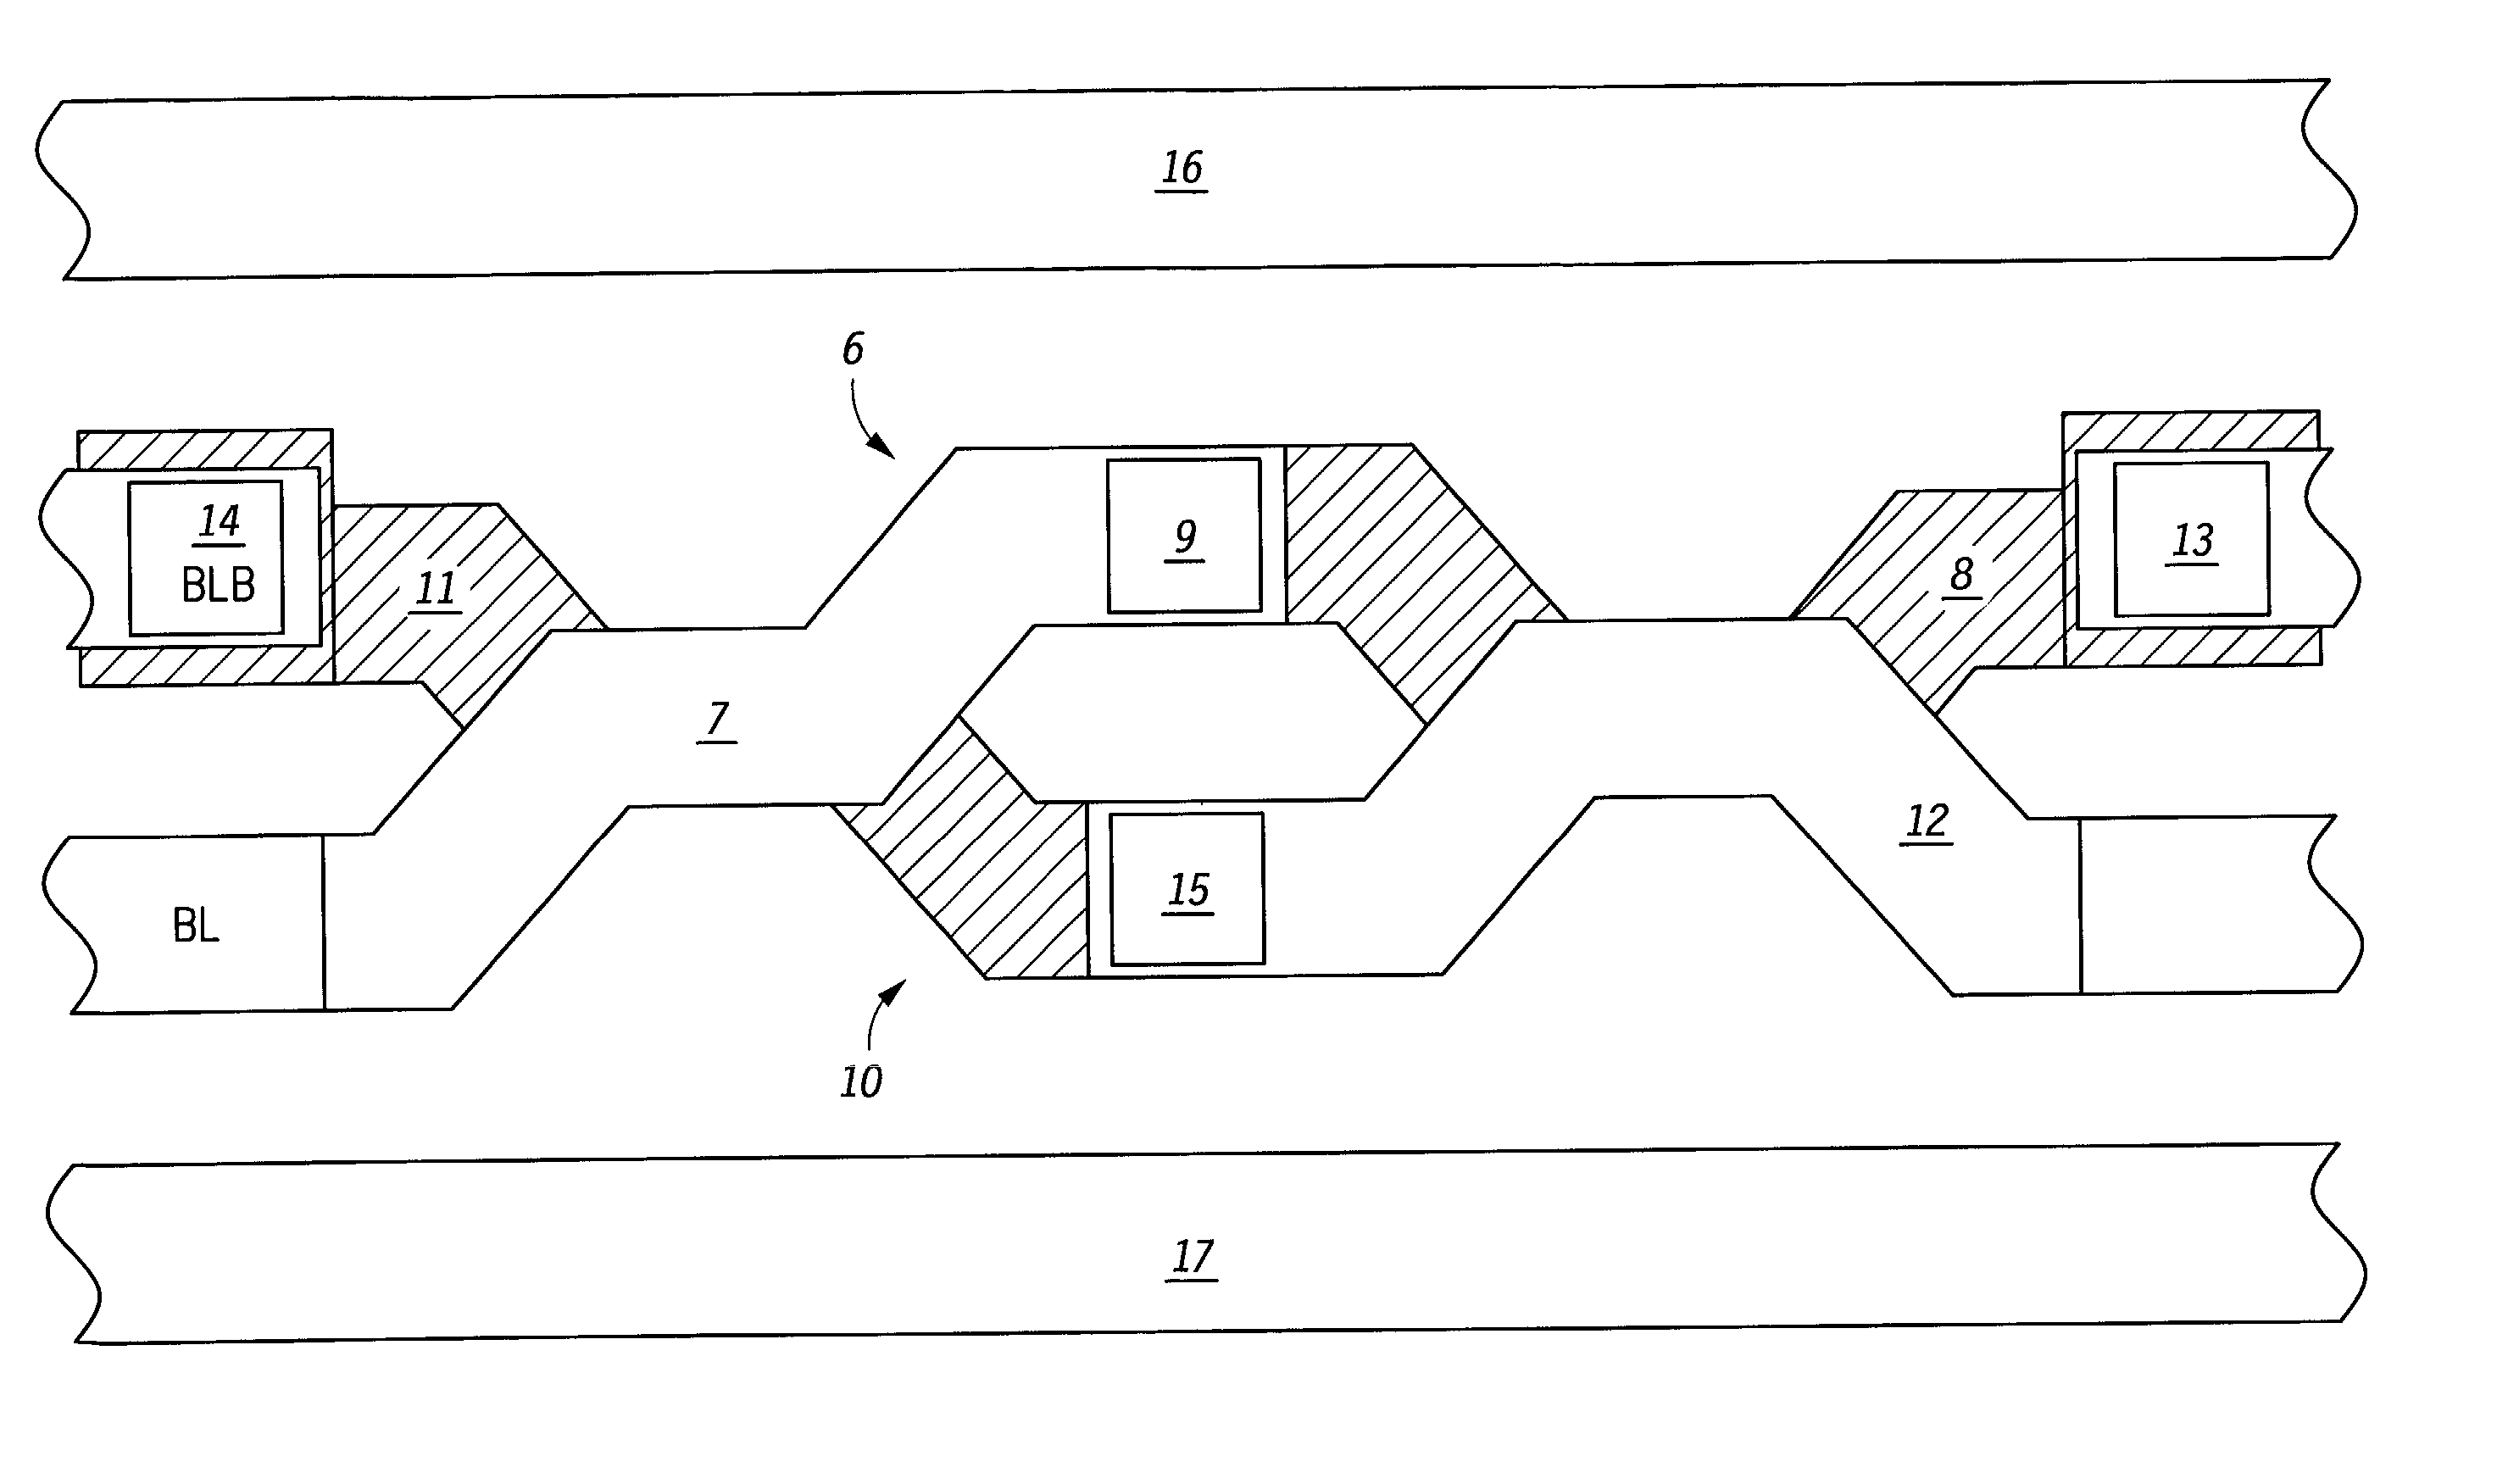 Integrated circuit having a balanced twist for differential signal lines